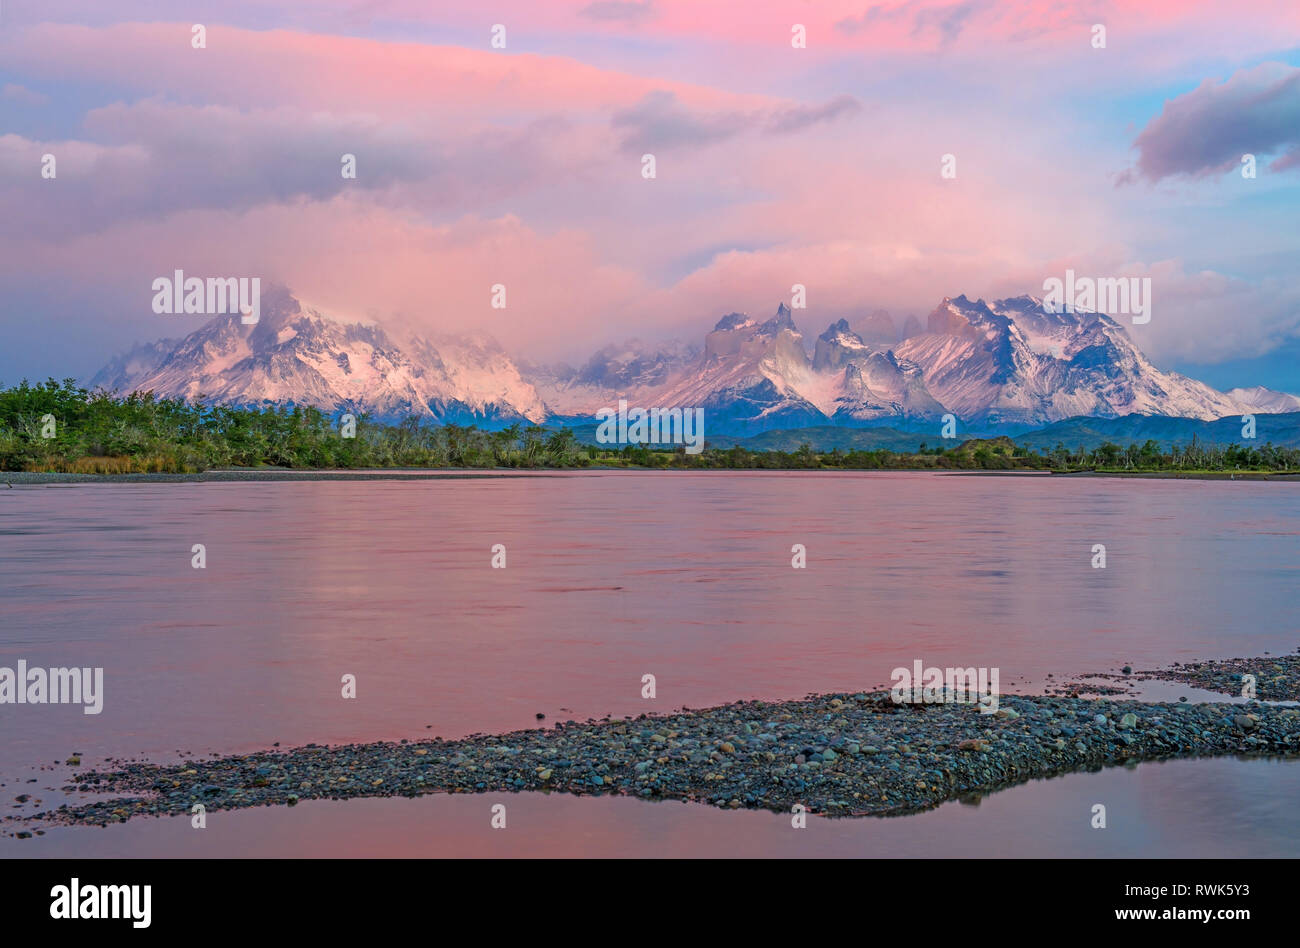 Pink sunrise along the Serrano river with the snowcapped peaks of Torres del Paine national park in the background, Patagonia, Chile. Stock Photo